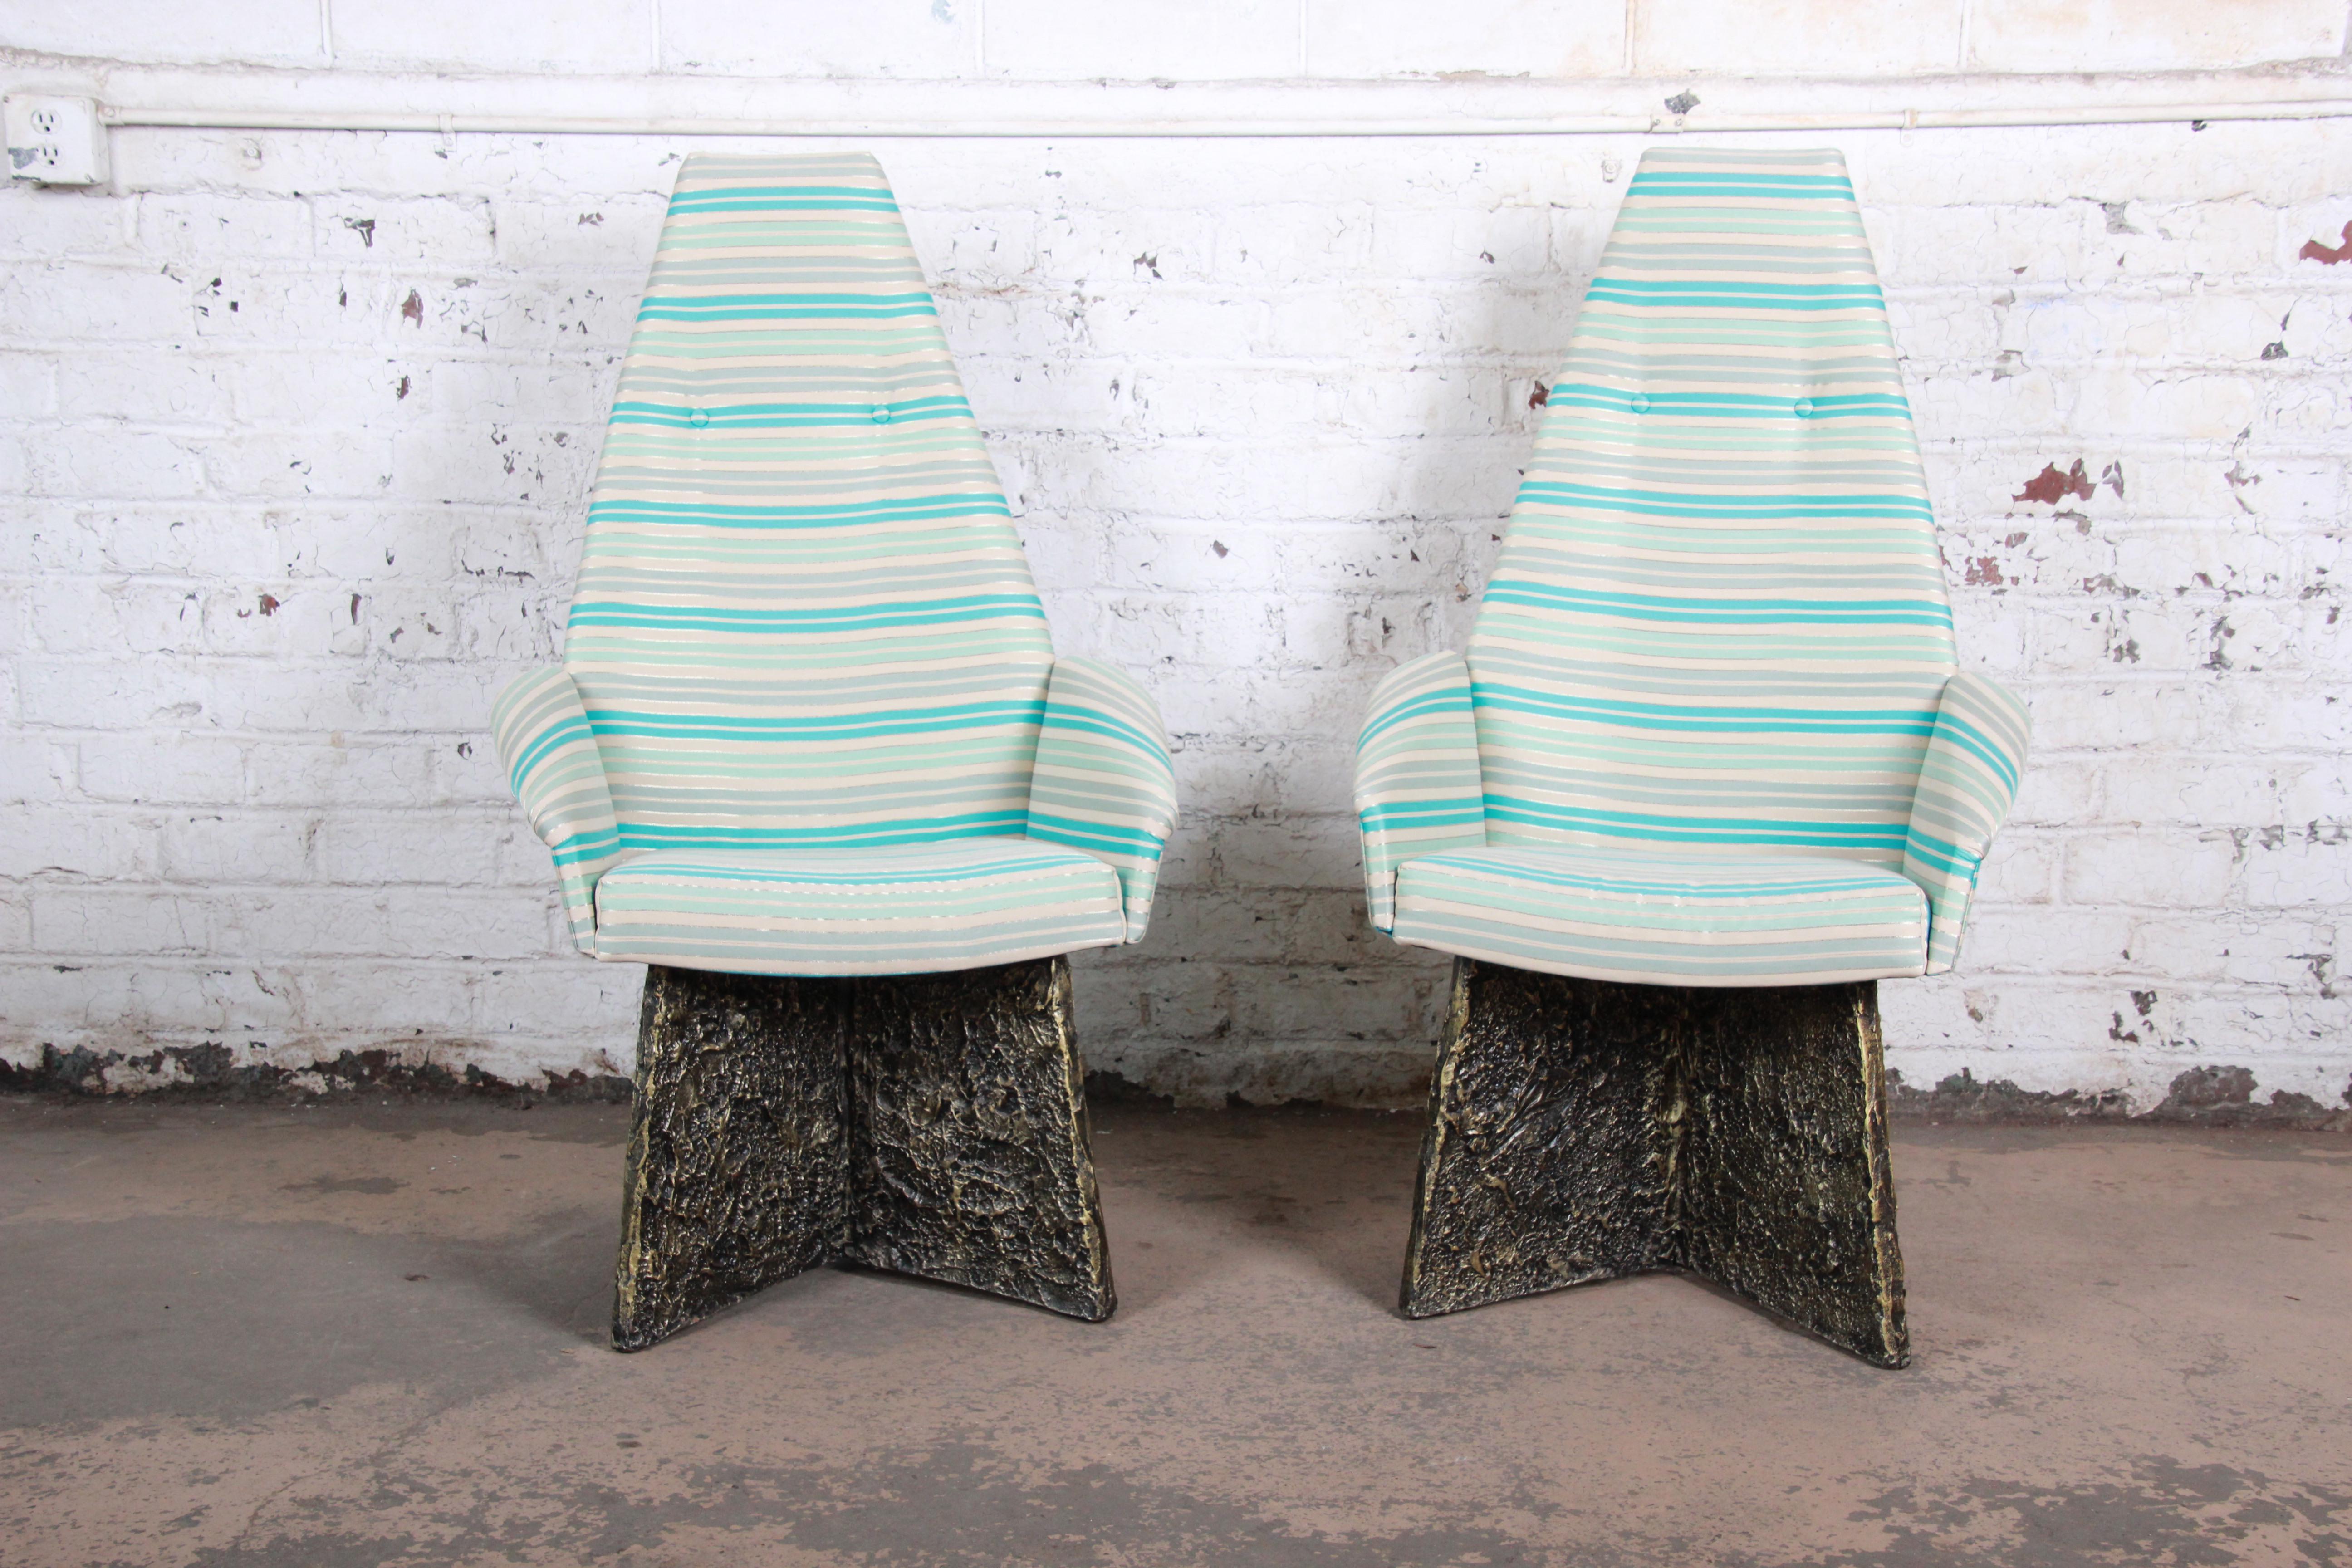 A rare and outstanding pair of Mid-Century Modern Brutalist lounge chairs designed by Adrian Pearsall. The chairs feature tall angular backs, with original striped upholstery and textured bronze resin bases. Iconic examples of the Brutalist design